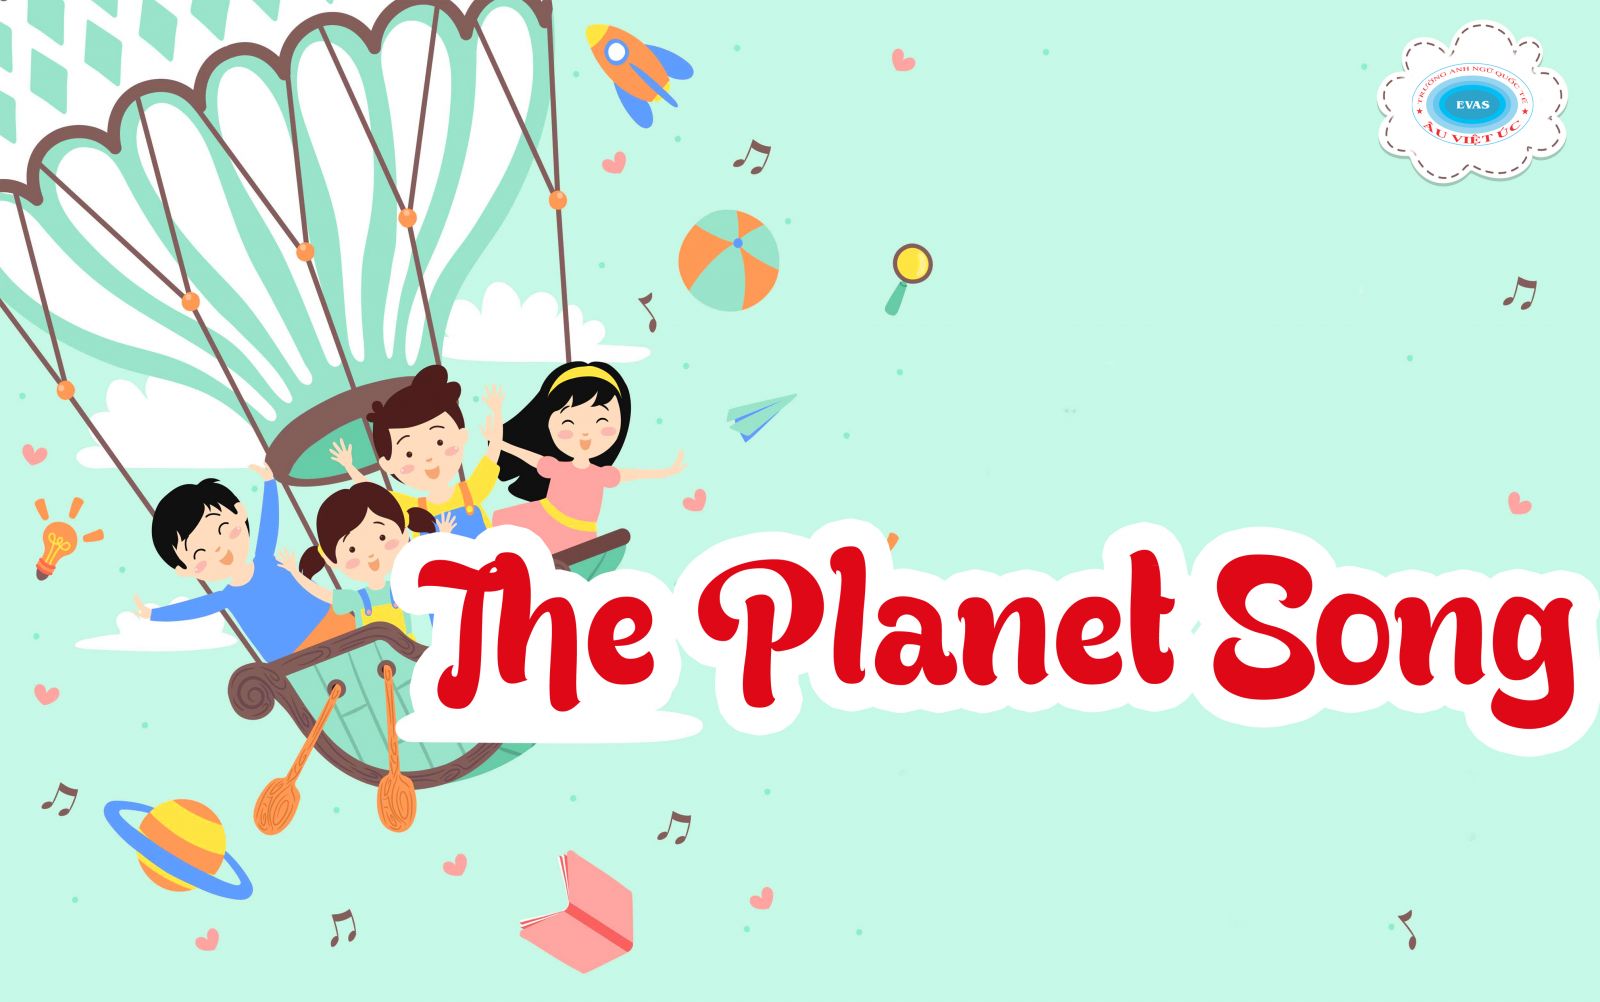 The Planet Song and more